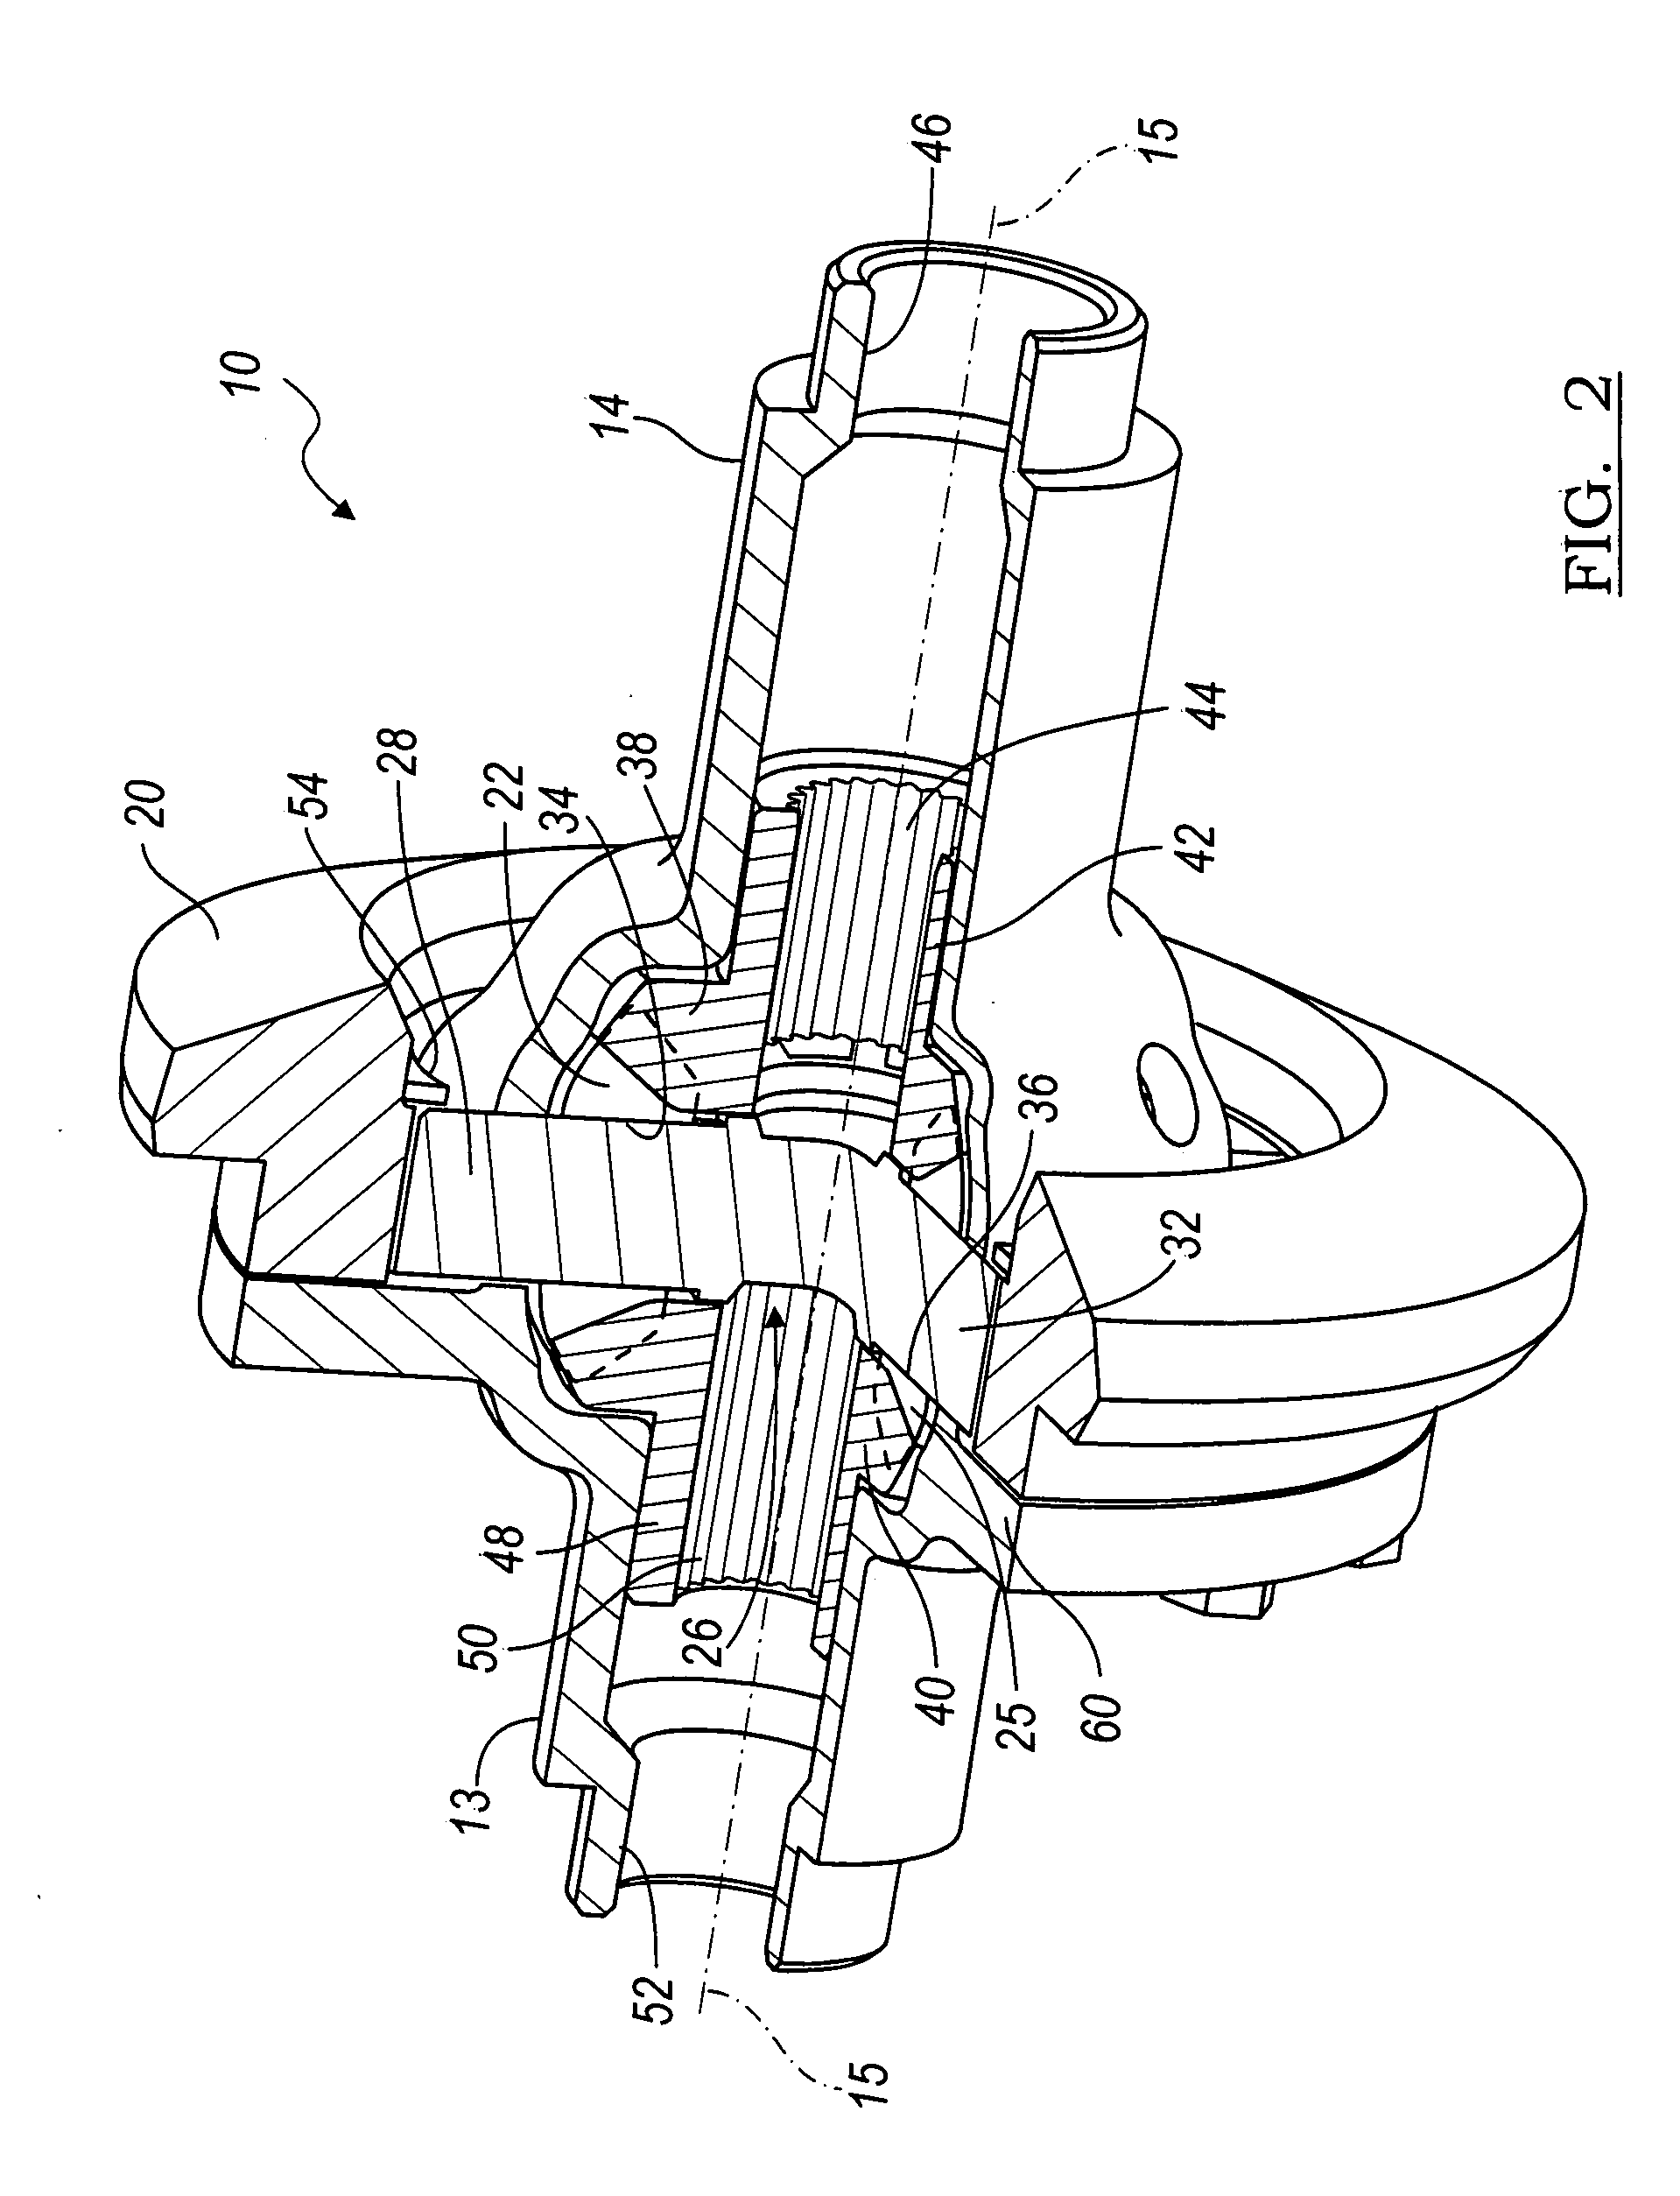 Differential mechanism assembly